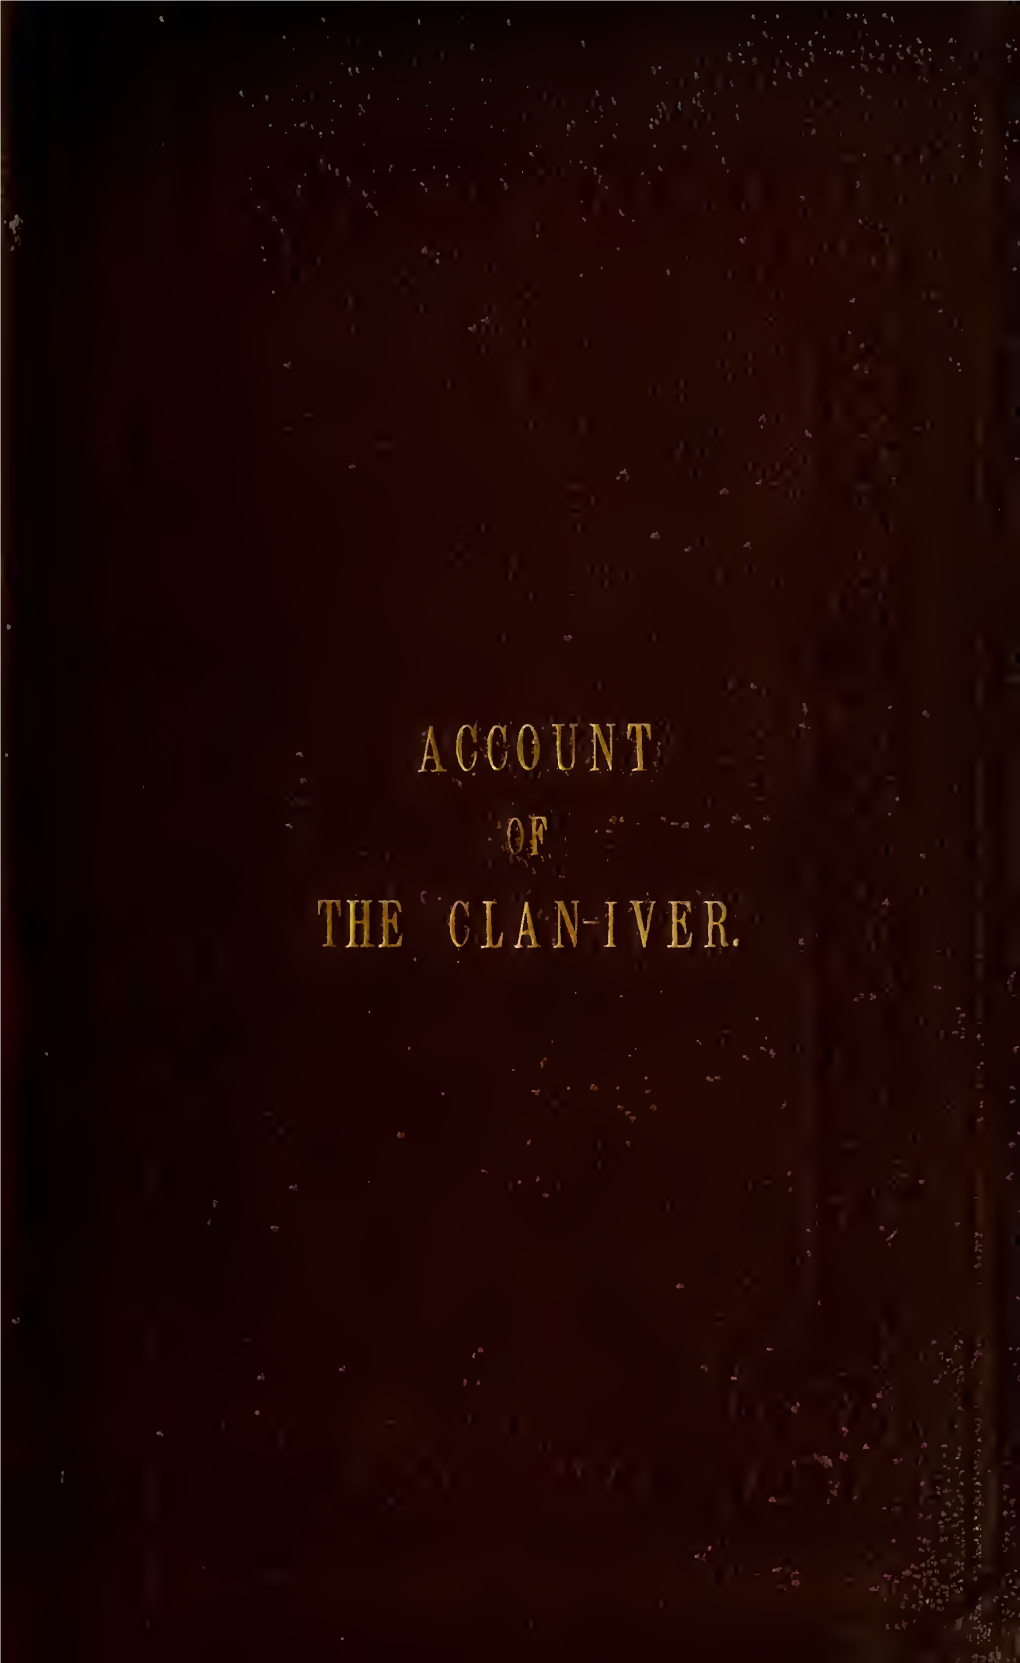 An Account of the Clan-Iver